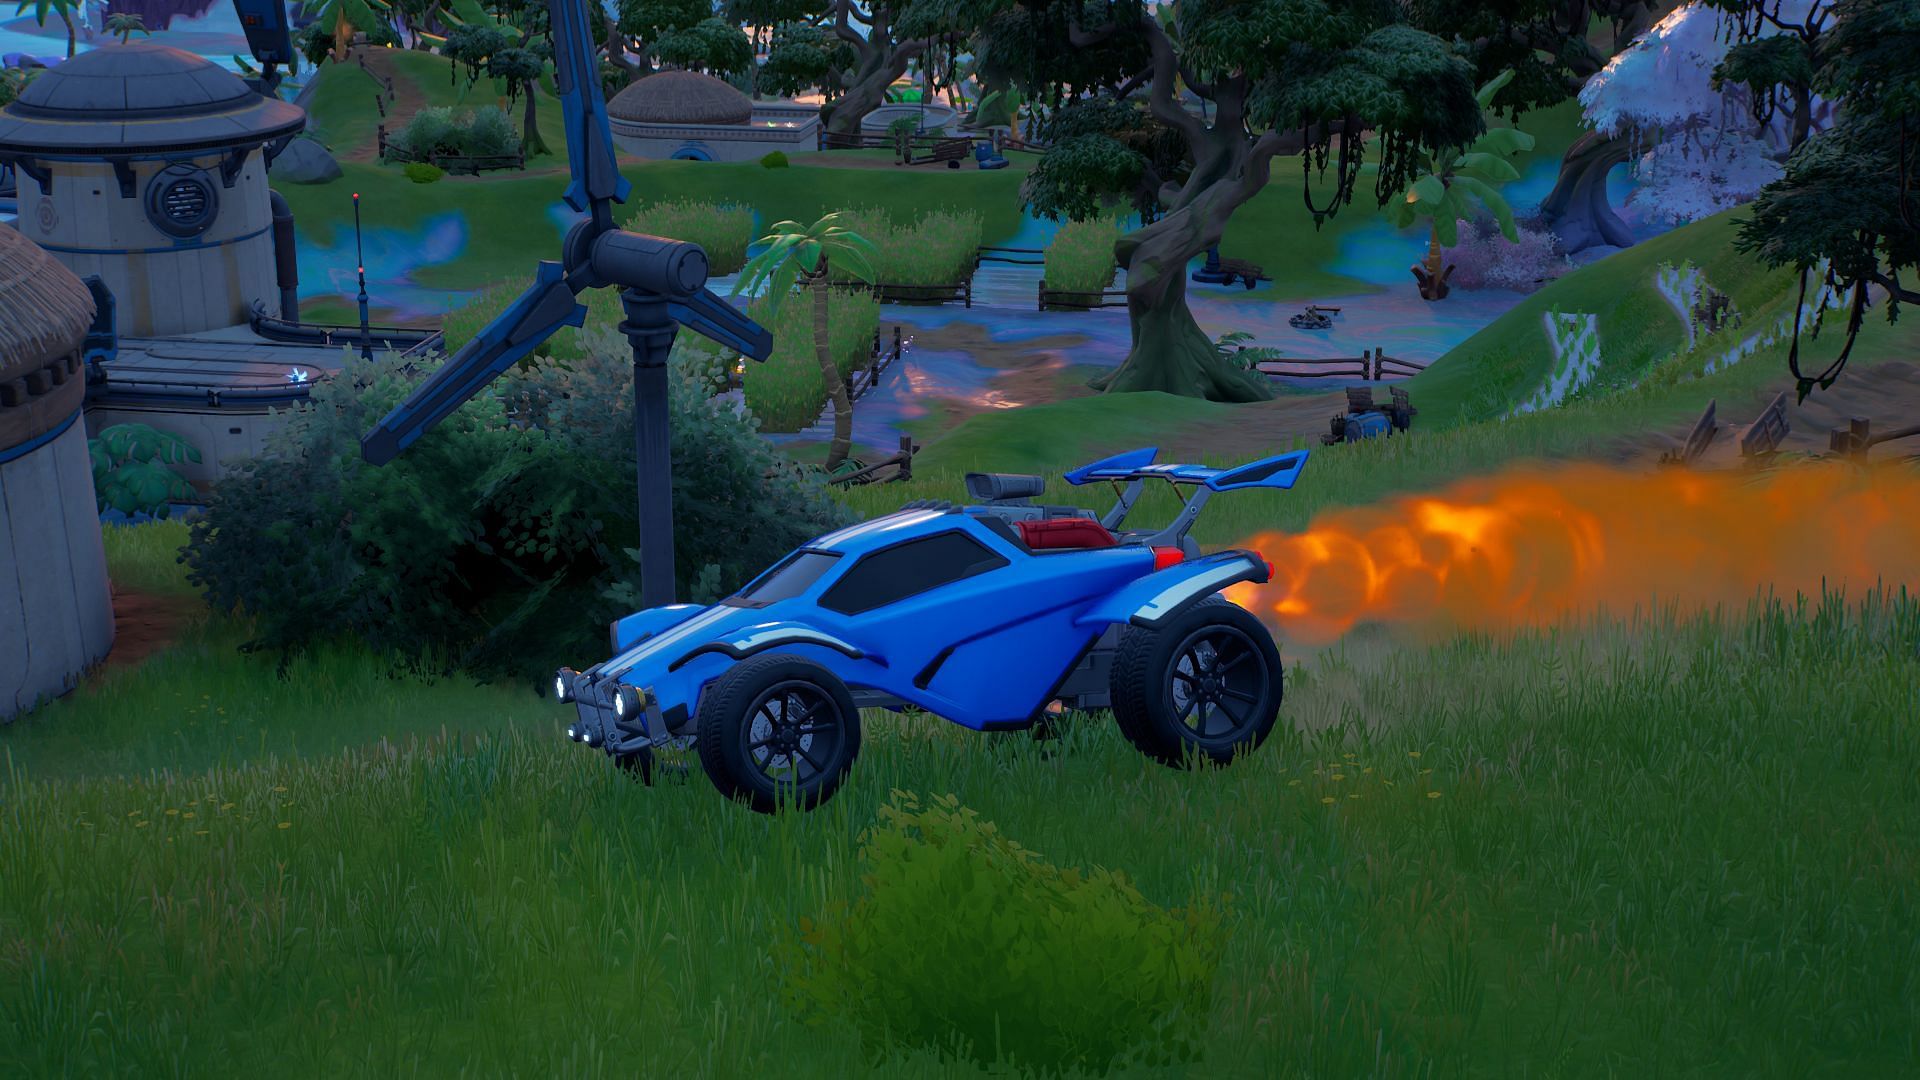 Fortnite leak suggests Rocket League vehicles could be added in soon